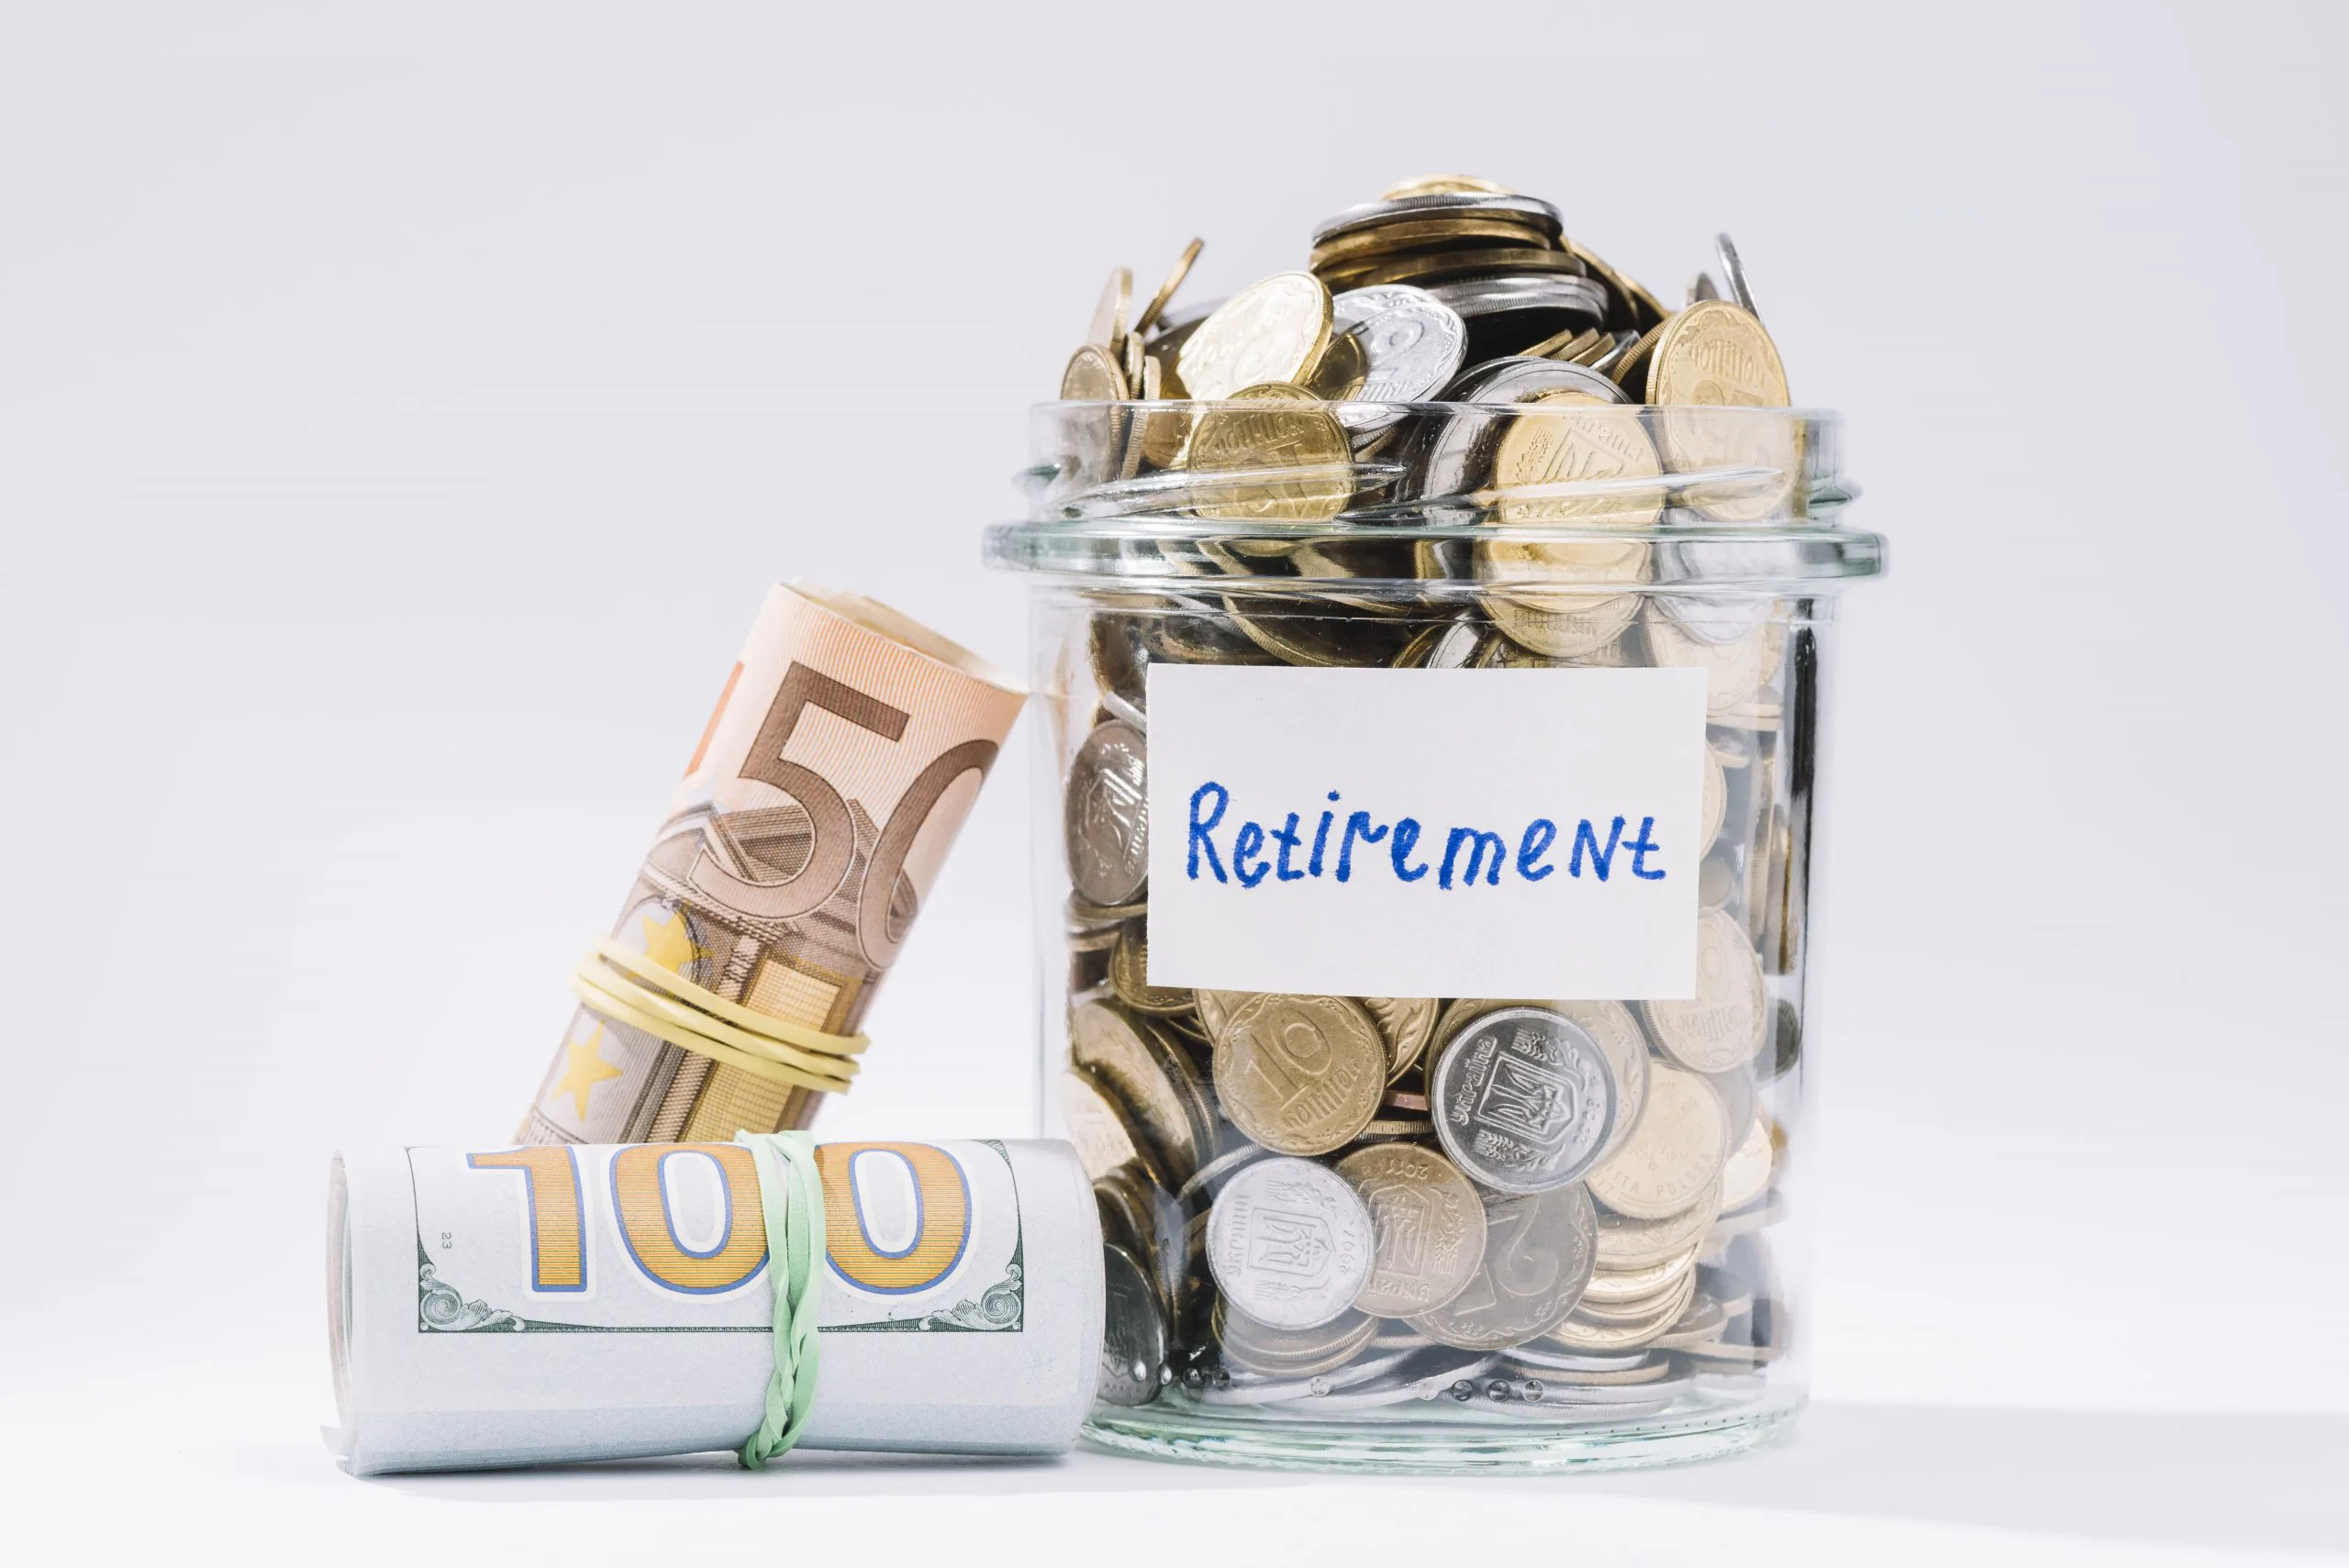 Retirement Planning: When Is The Right Time To Start?